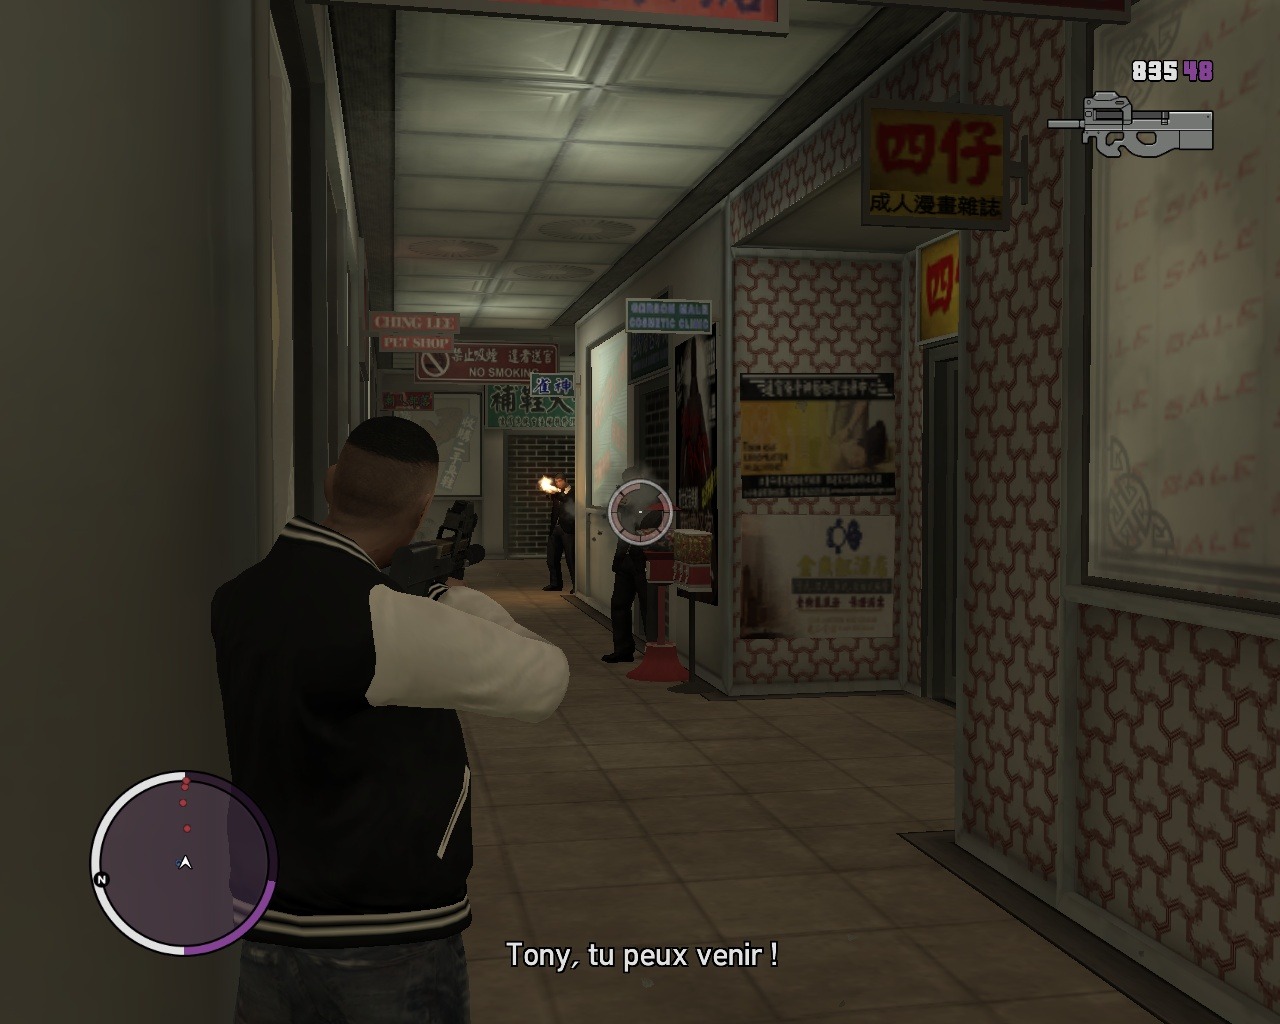 Grand Theft Auto 4: Episodes From Liberty City Full indir 